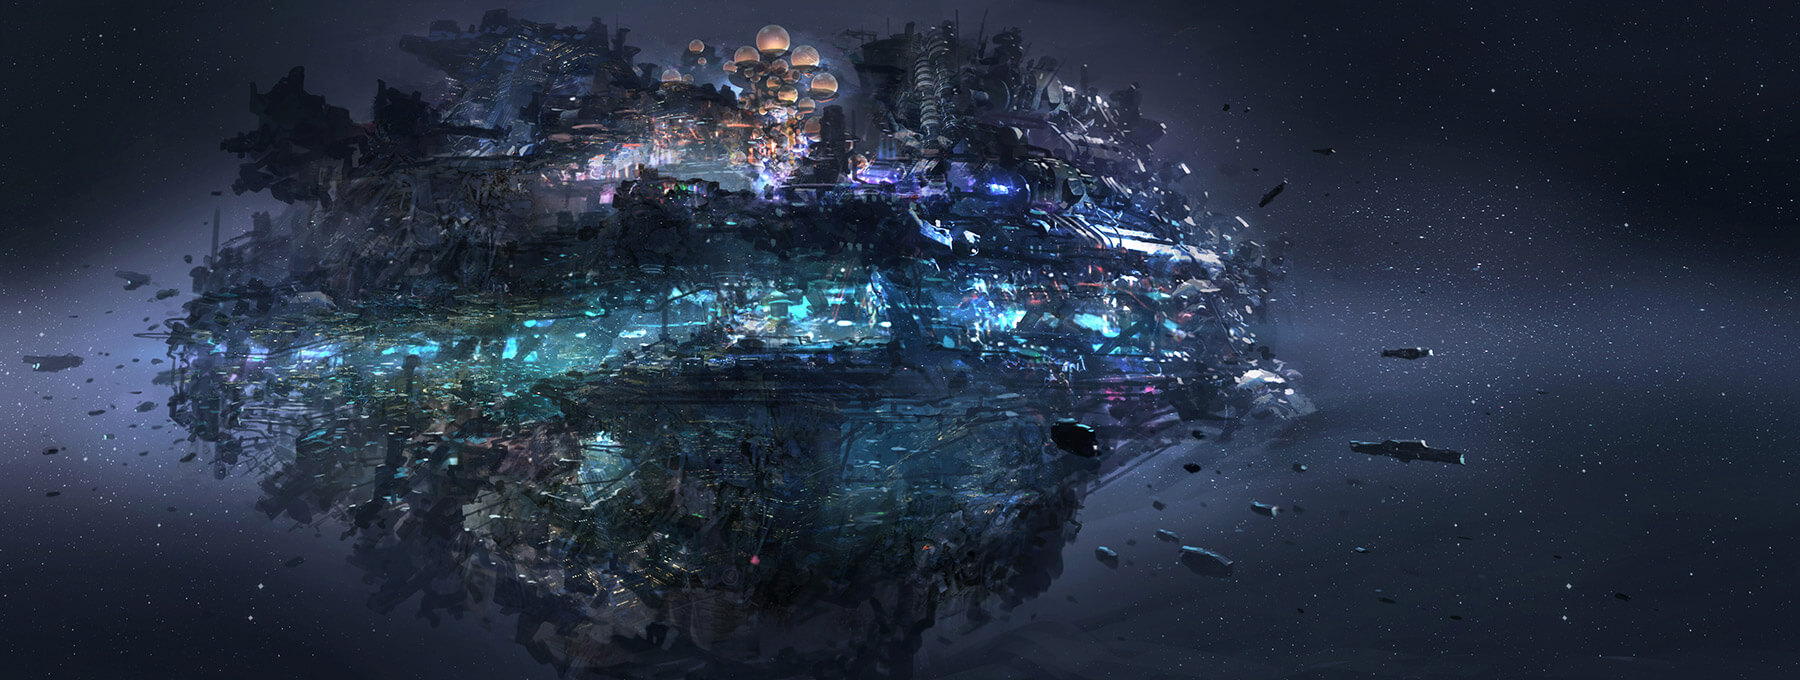 Explore The World Of Valerian With Gorgeous Concept Art And 360-Degree Imagery